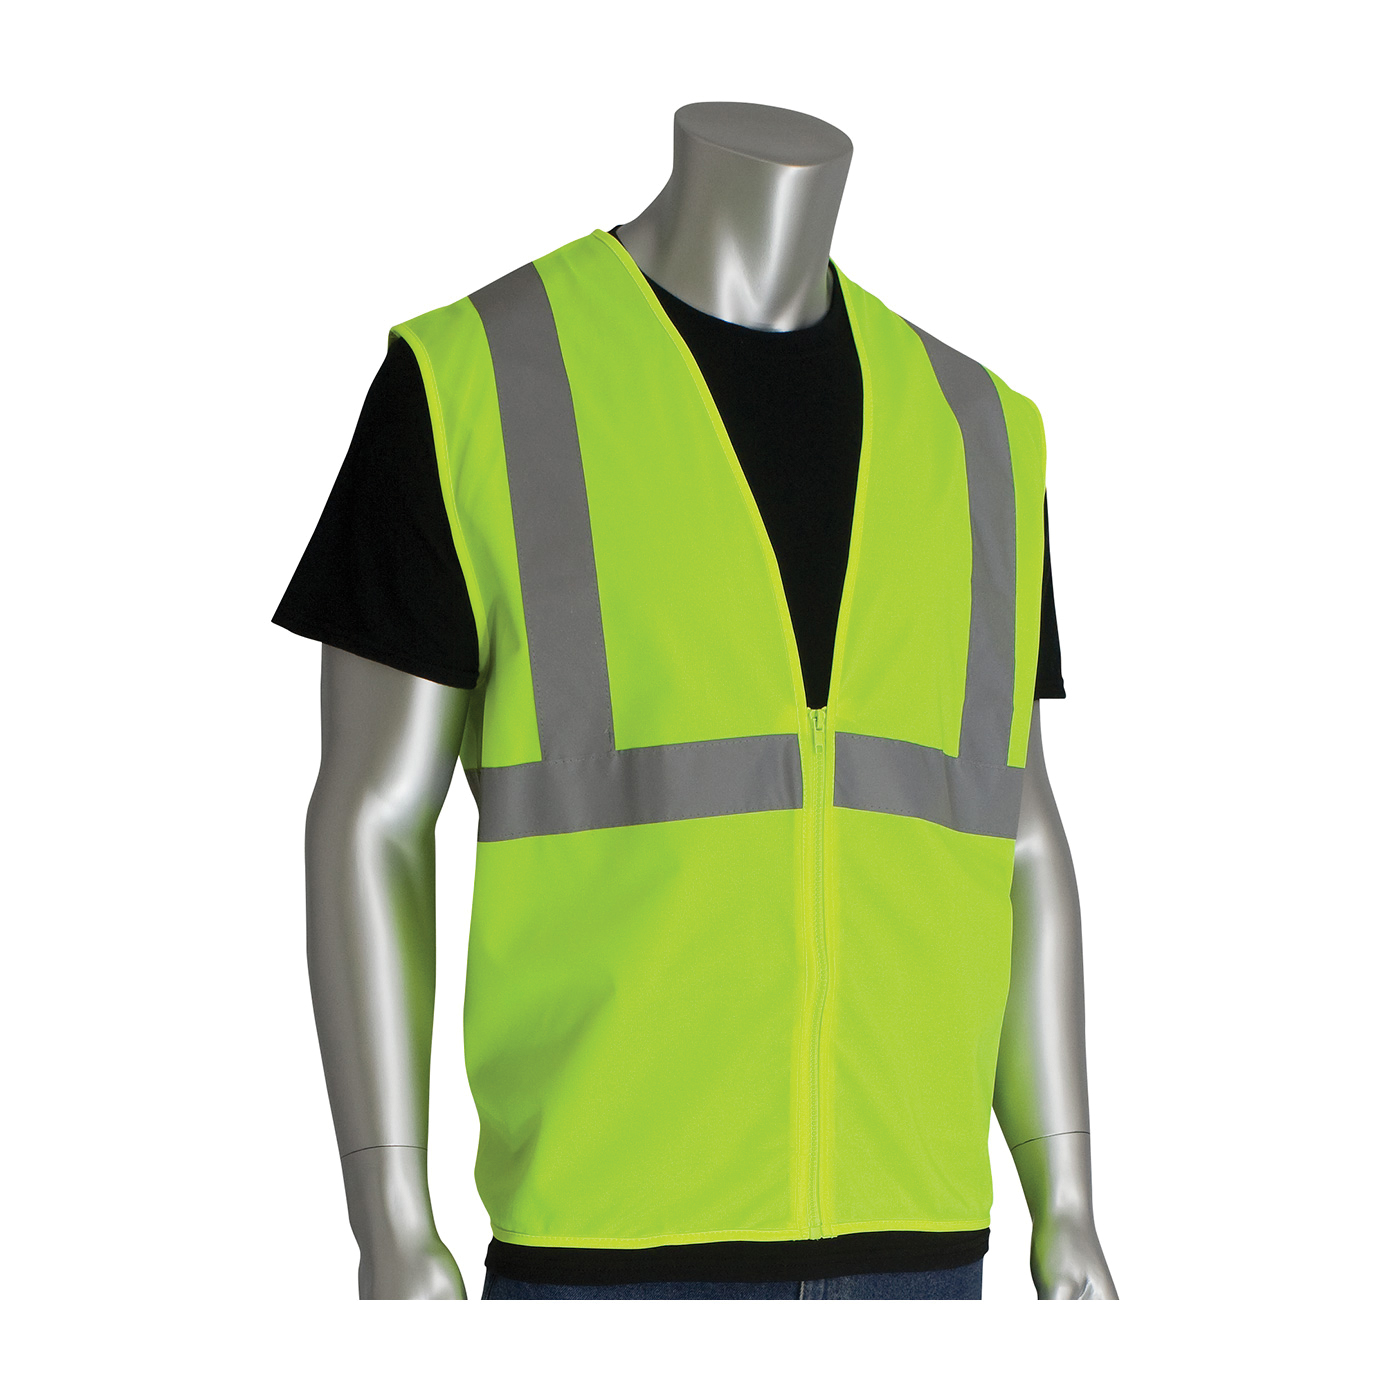 PIP® 302-WCENGZLY-XL Standard Solid Vest, XL, Hi-Viz Lime Yellow, Polyester Mesh, Zipper Closure, ANSI Class: Class 2, Specifications Met: ANSI 107 Type R Class 2